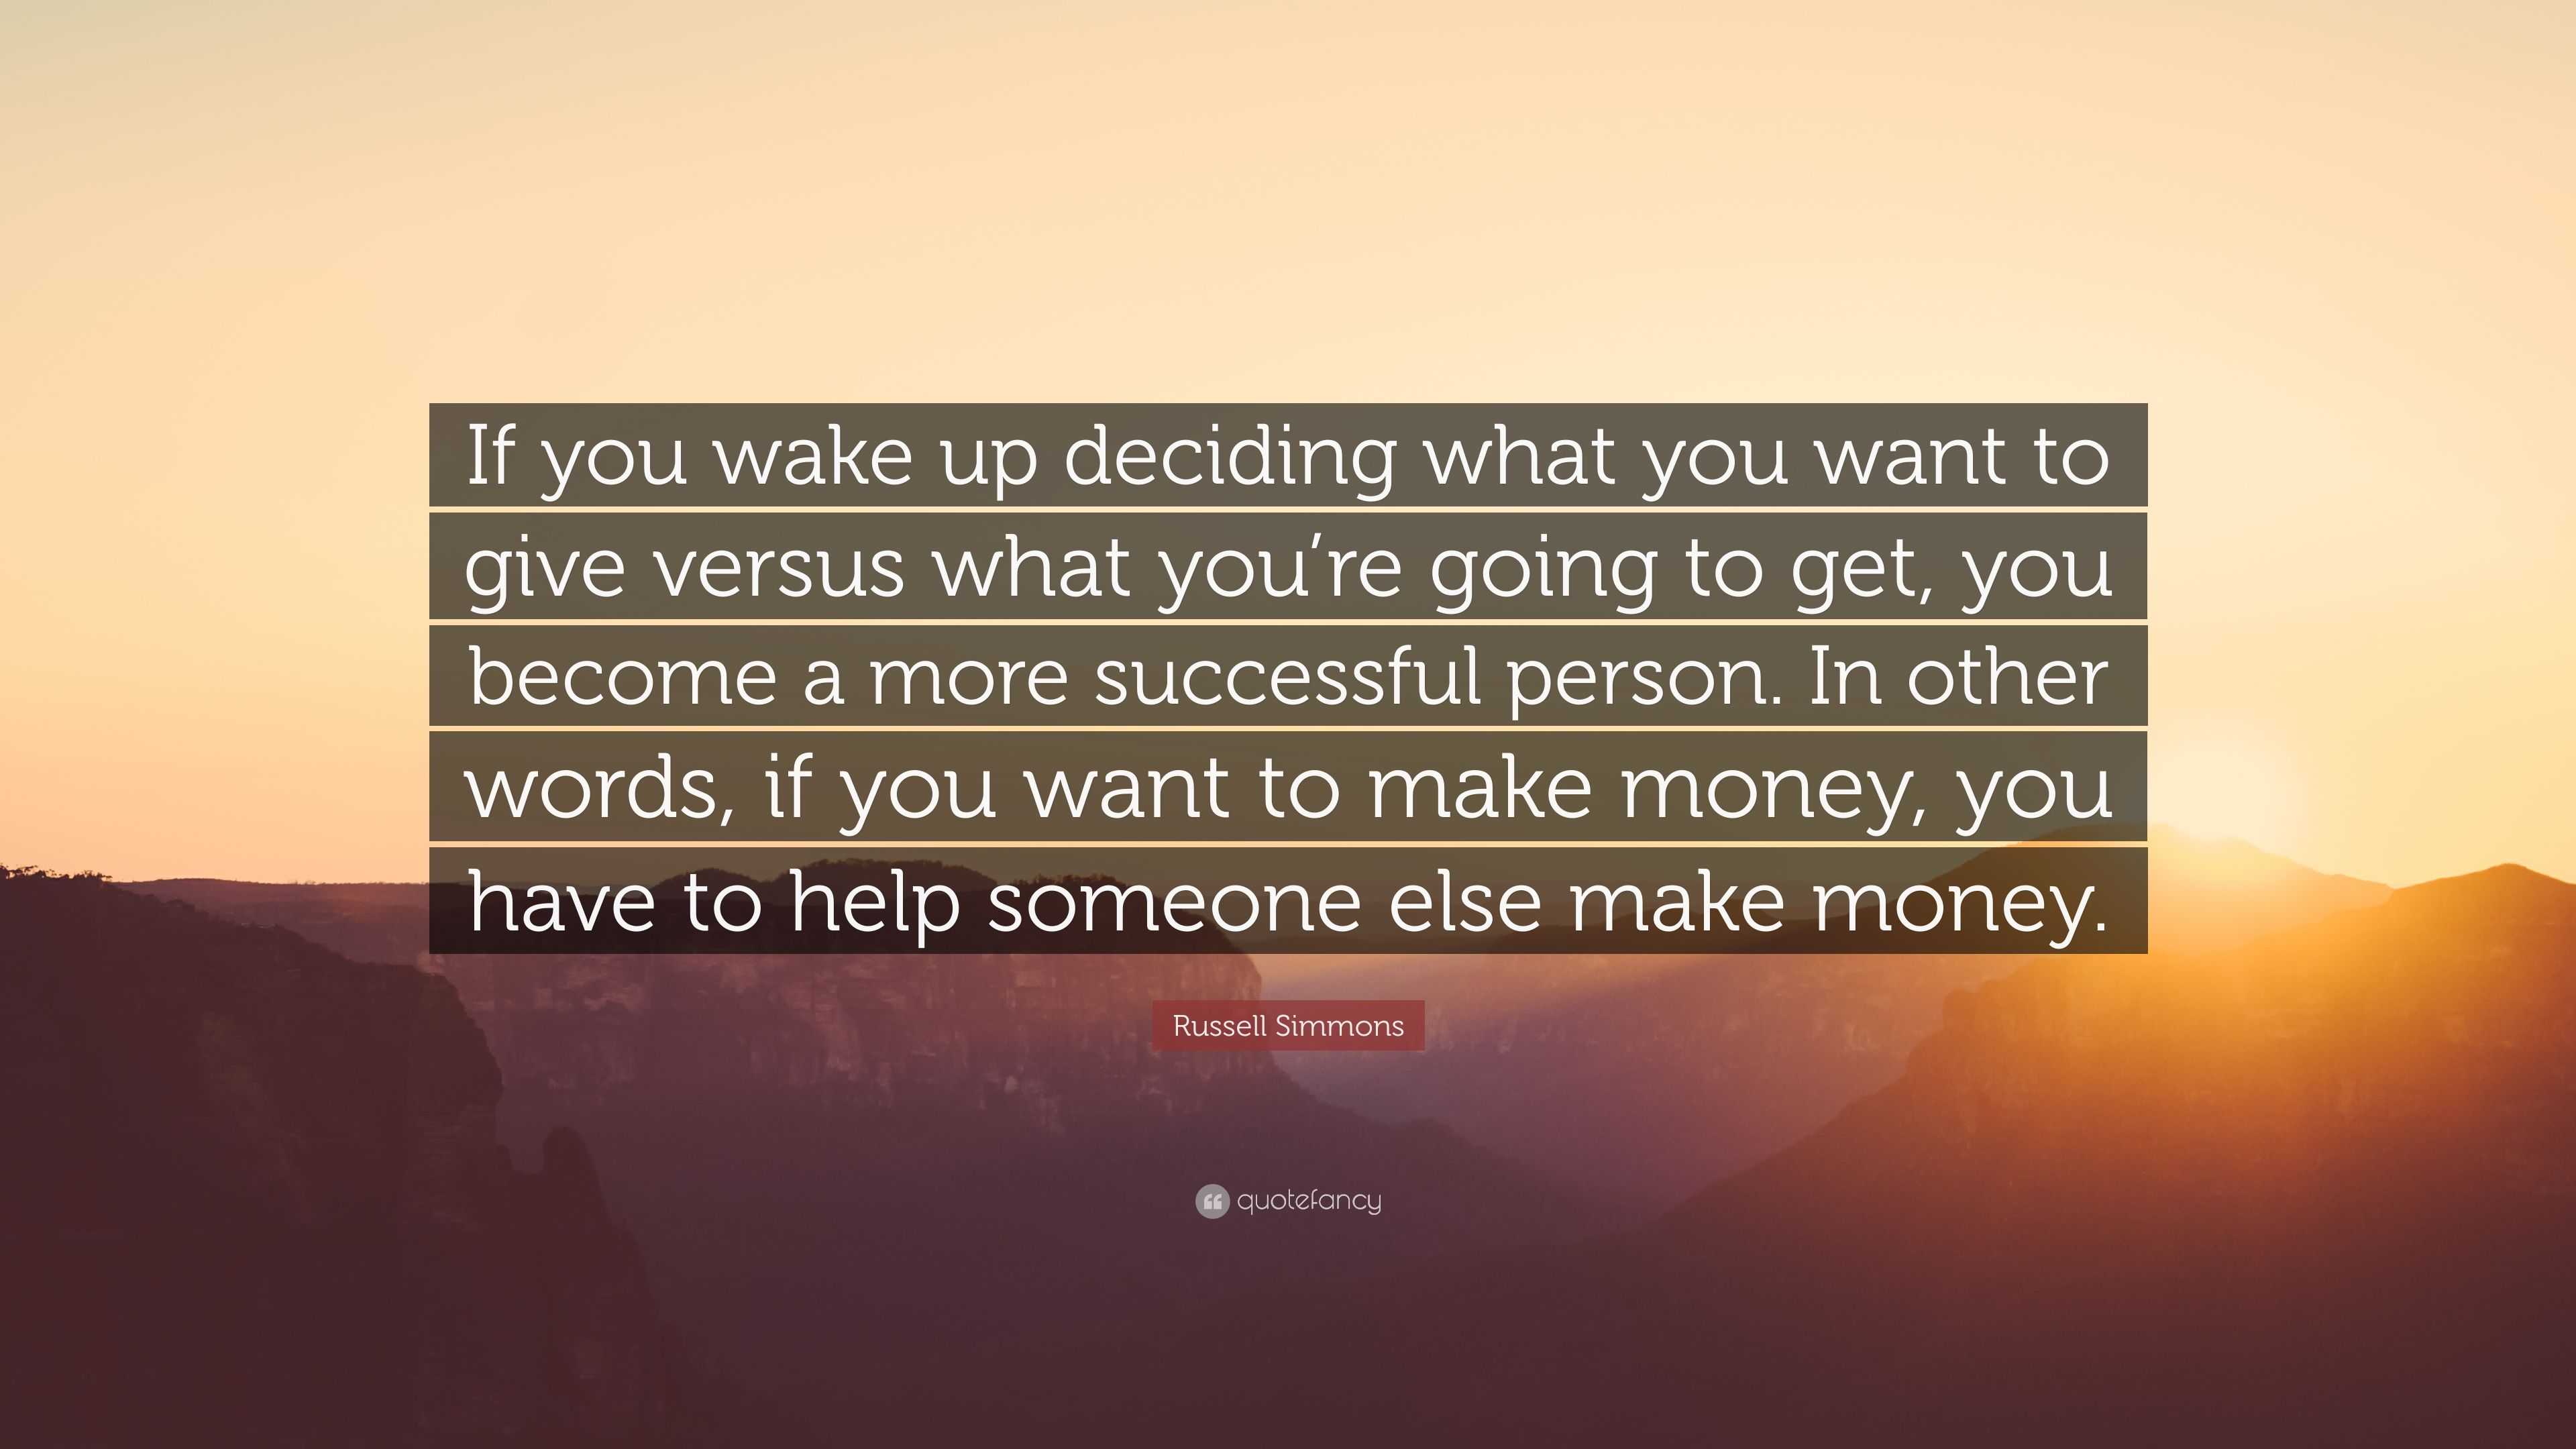 Russell Simmons Quote: “If you wake up deciding what you want to give  versus what you're going to get, you become a more successful person. In  o...”